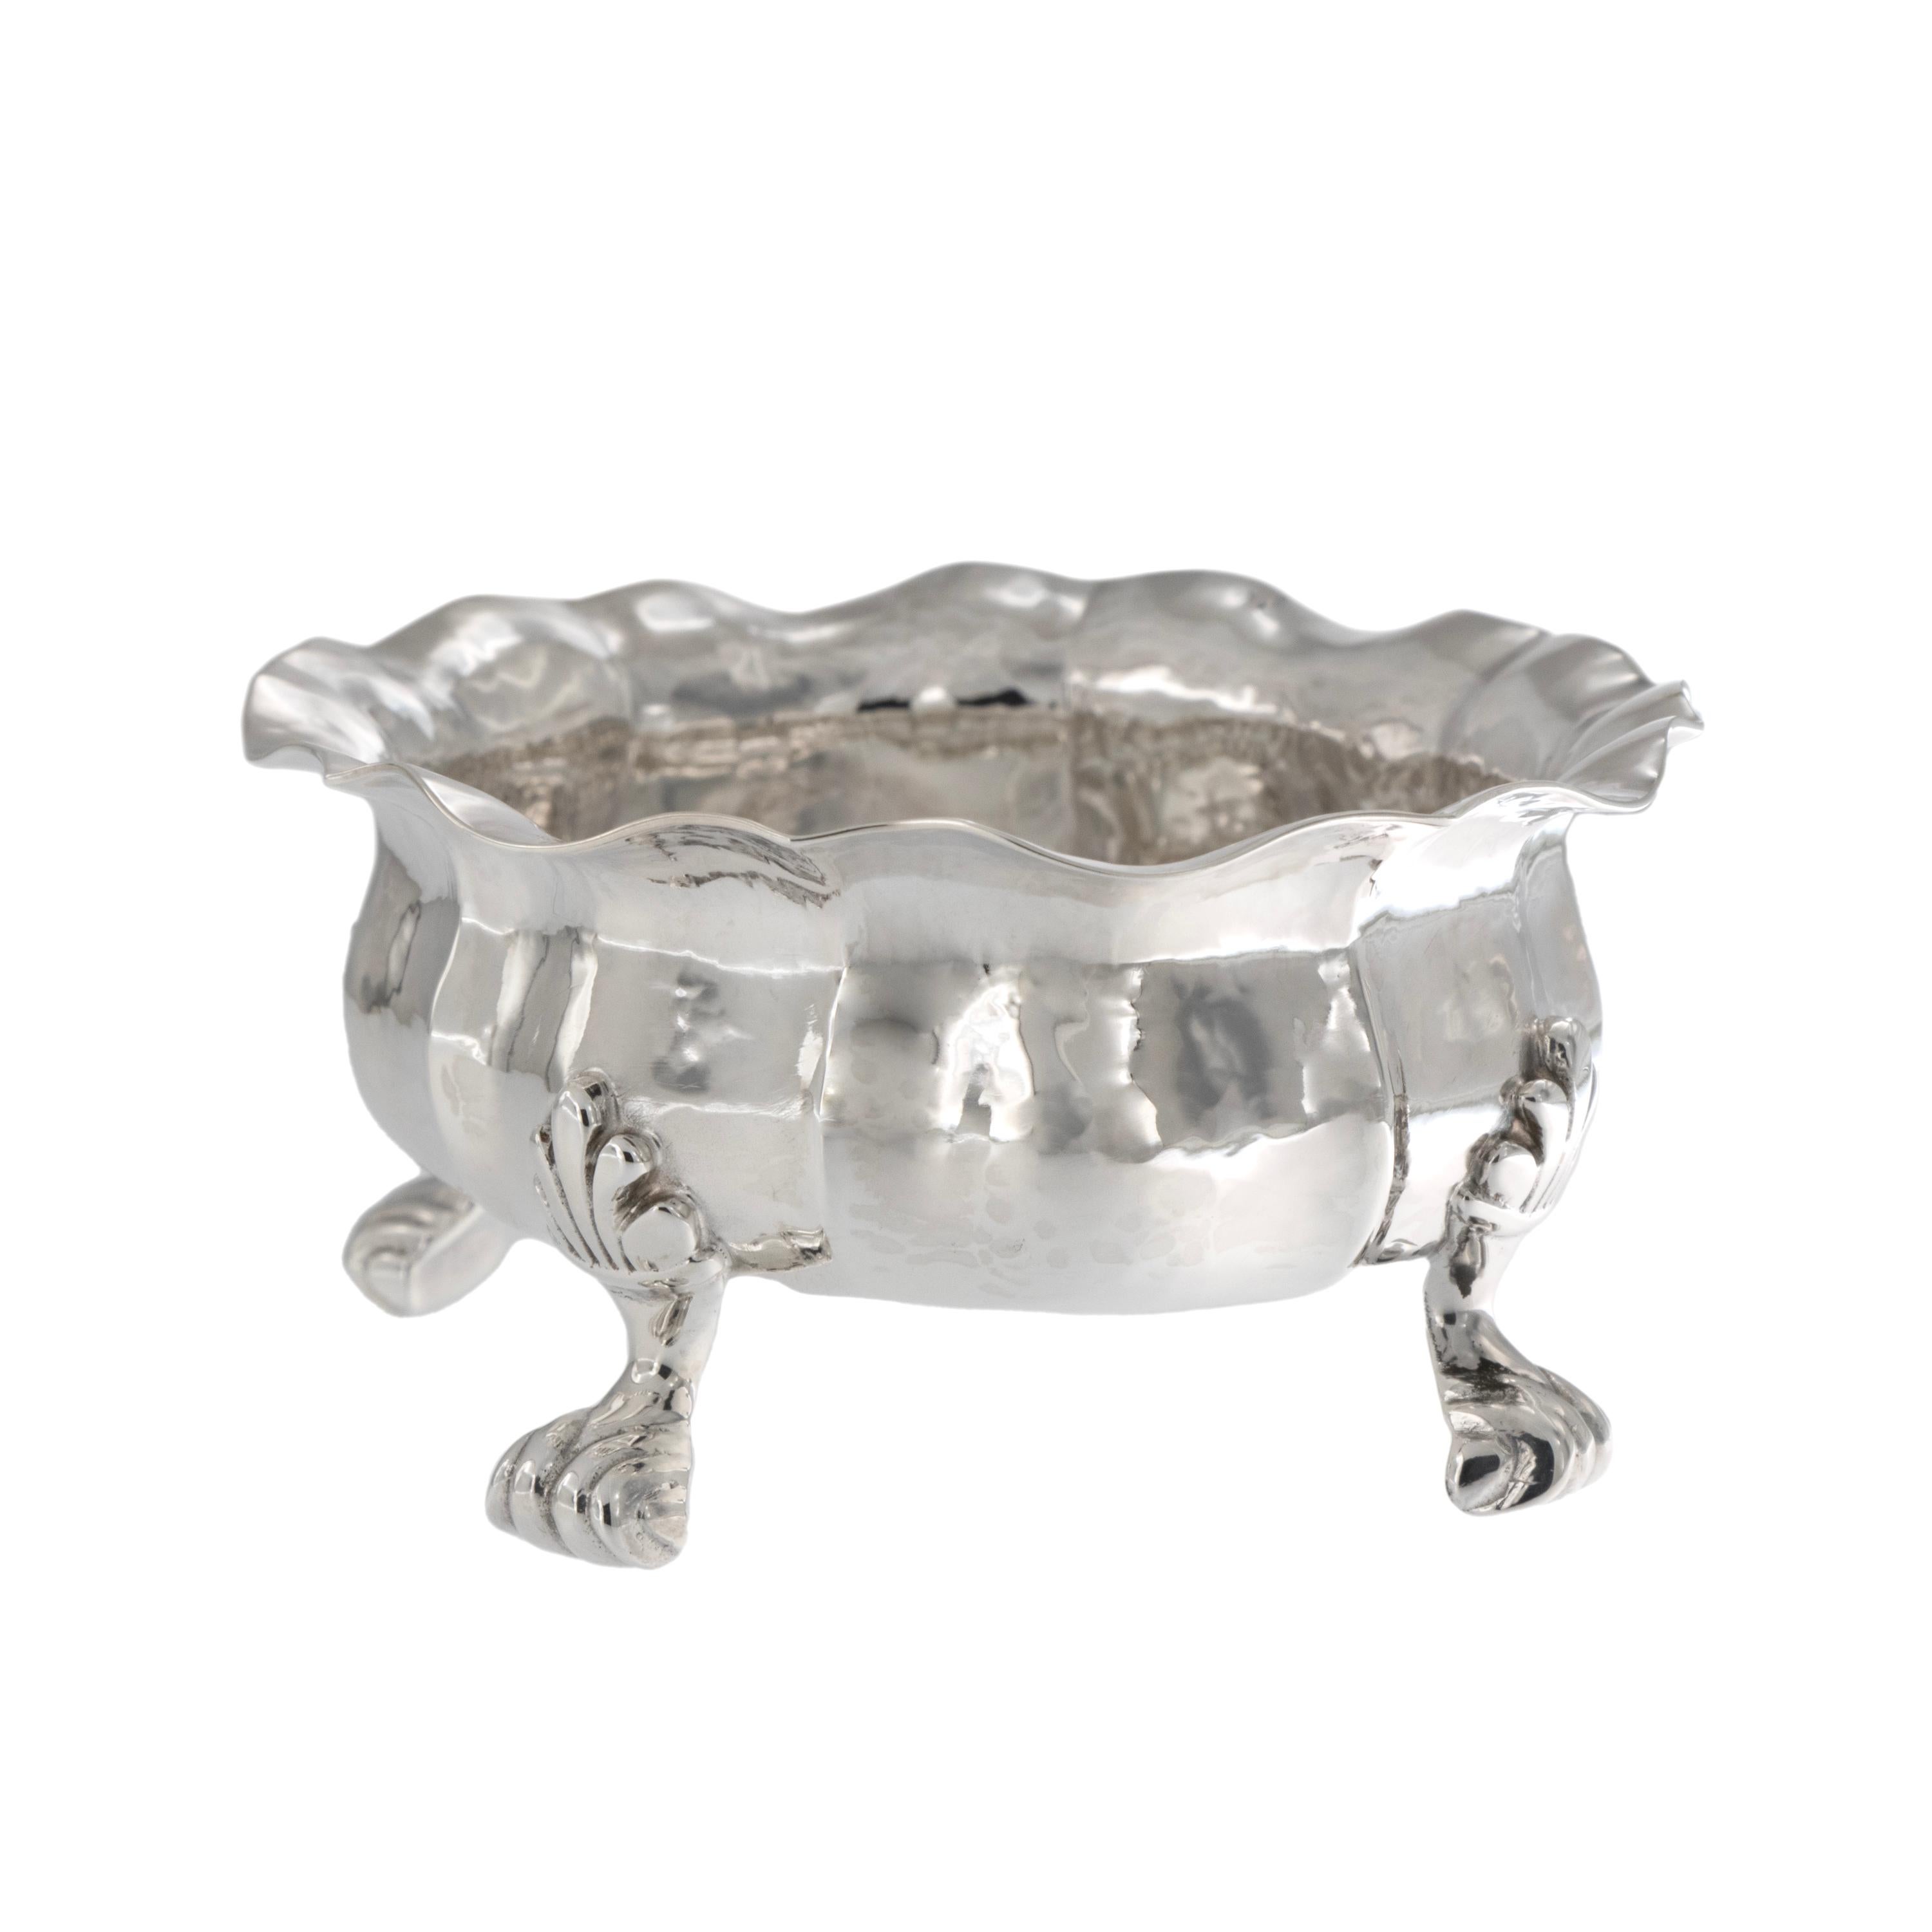 Famed for jewelry and silver since the mid-18th century, Buccellati still produces in small workshops with skilled artisans considered the best in Italy. This vintage classical hand-hammered sterling silver footed bowl with spoon was made by